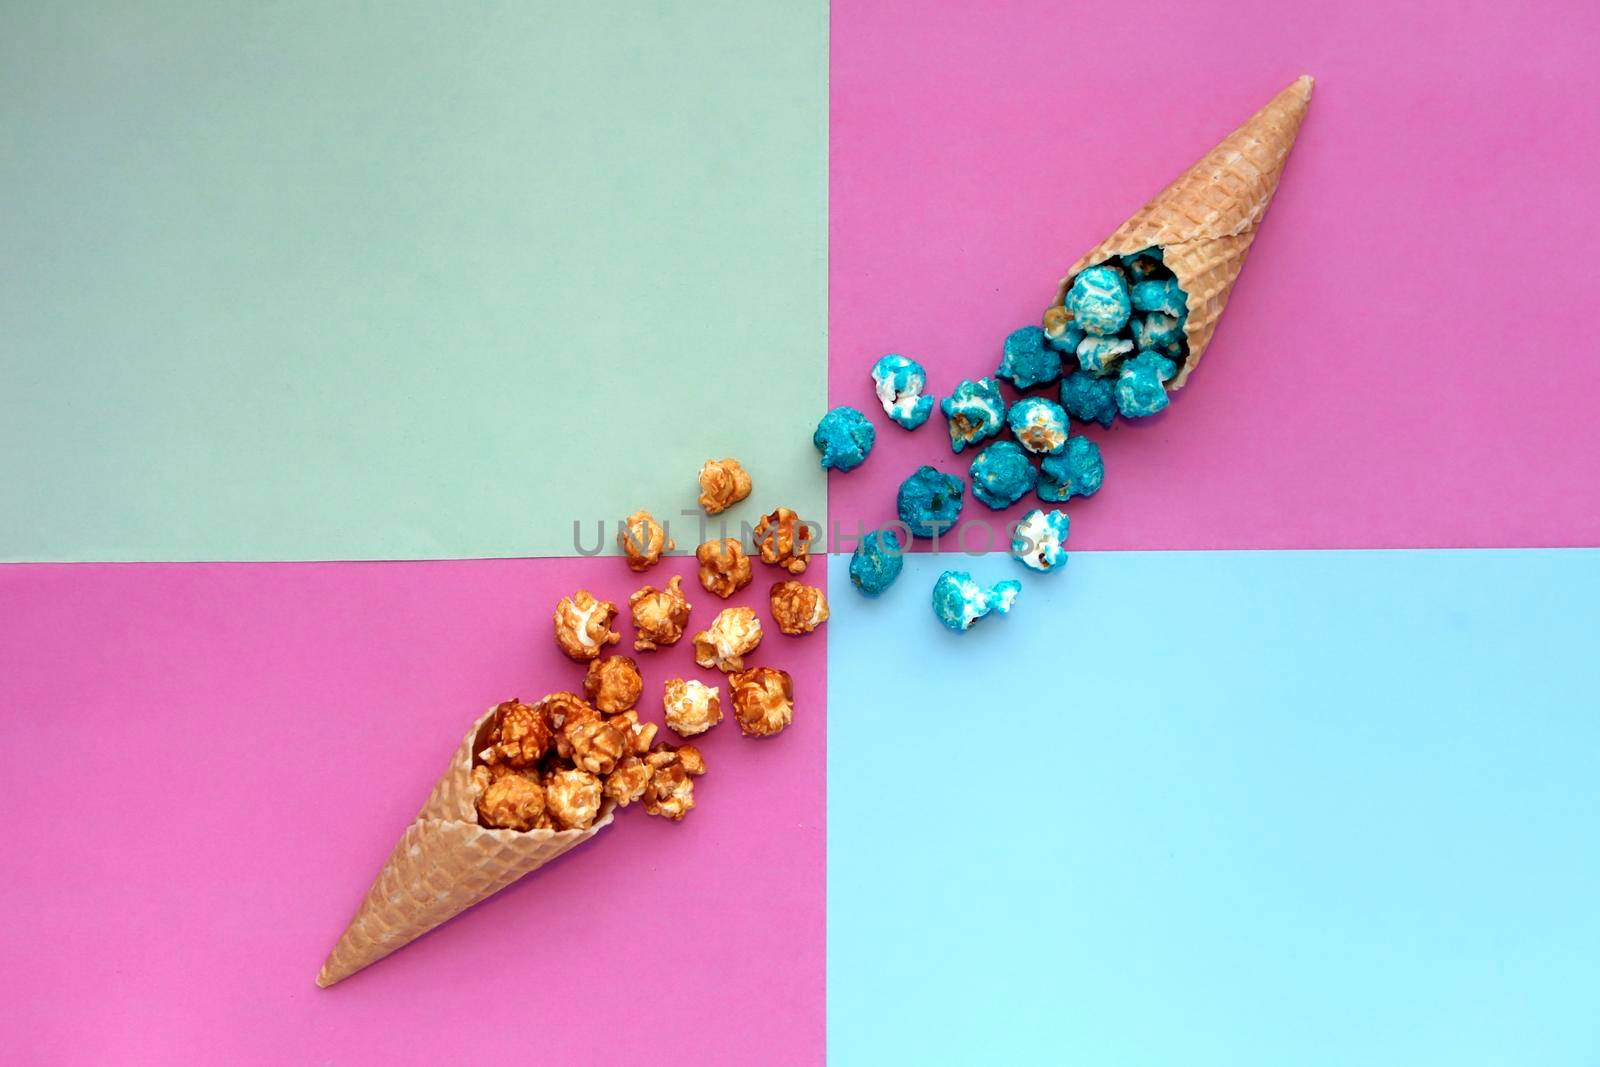 Popcorn spill out from waffle ice cream cone on pastel colorful background. Blue and caramel Popcorn on a cone cornucopia Top view bright hipster background.